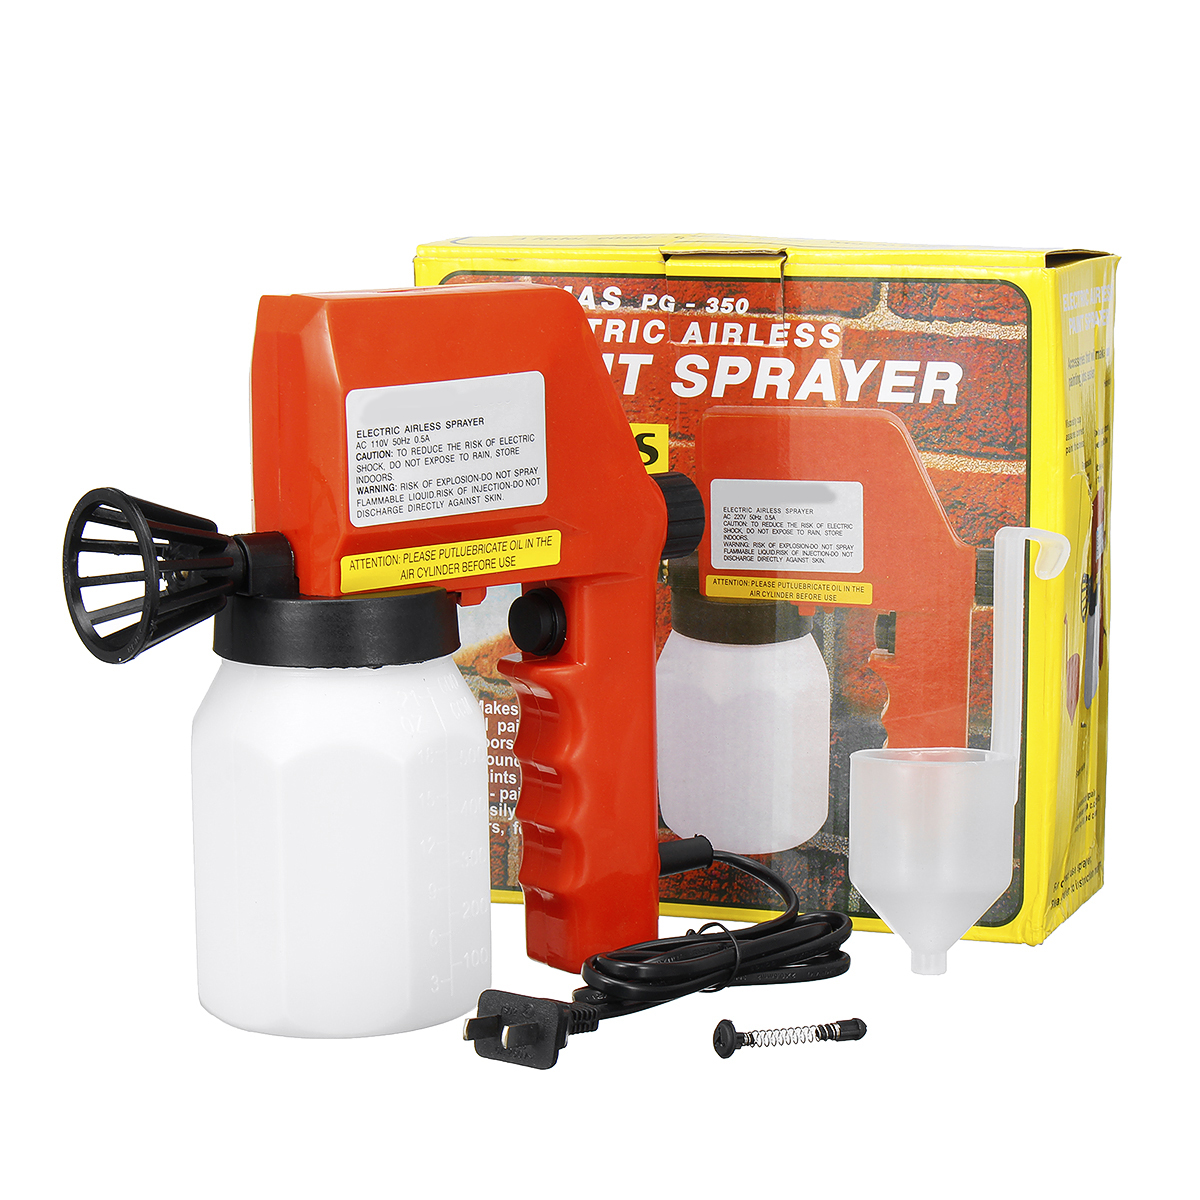 Electrical-Spray-PG-350-600ML-220V-08mm-Nozzle-Paint-Sprayer-Wall-Decorative-Painting-Blender-Paint--1587275-7